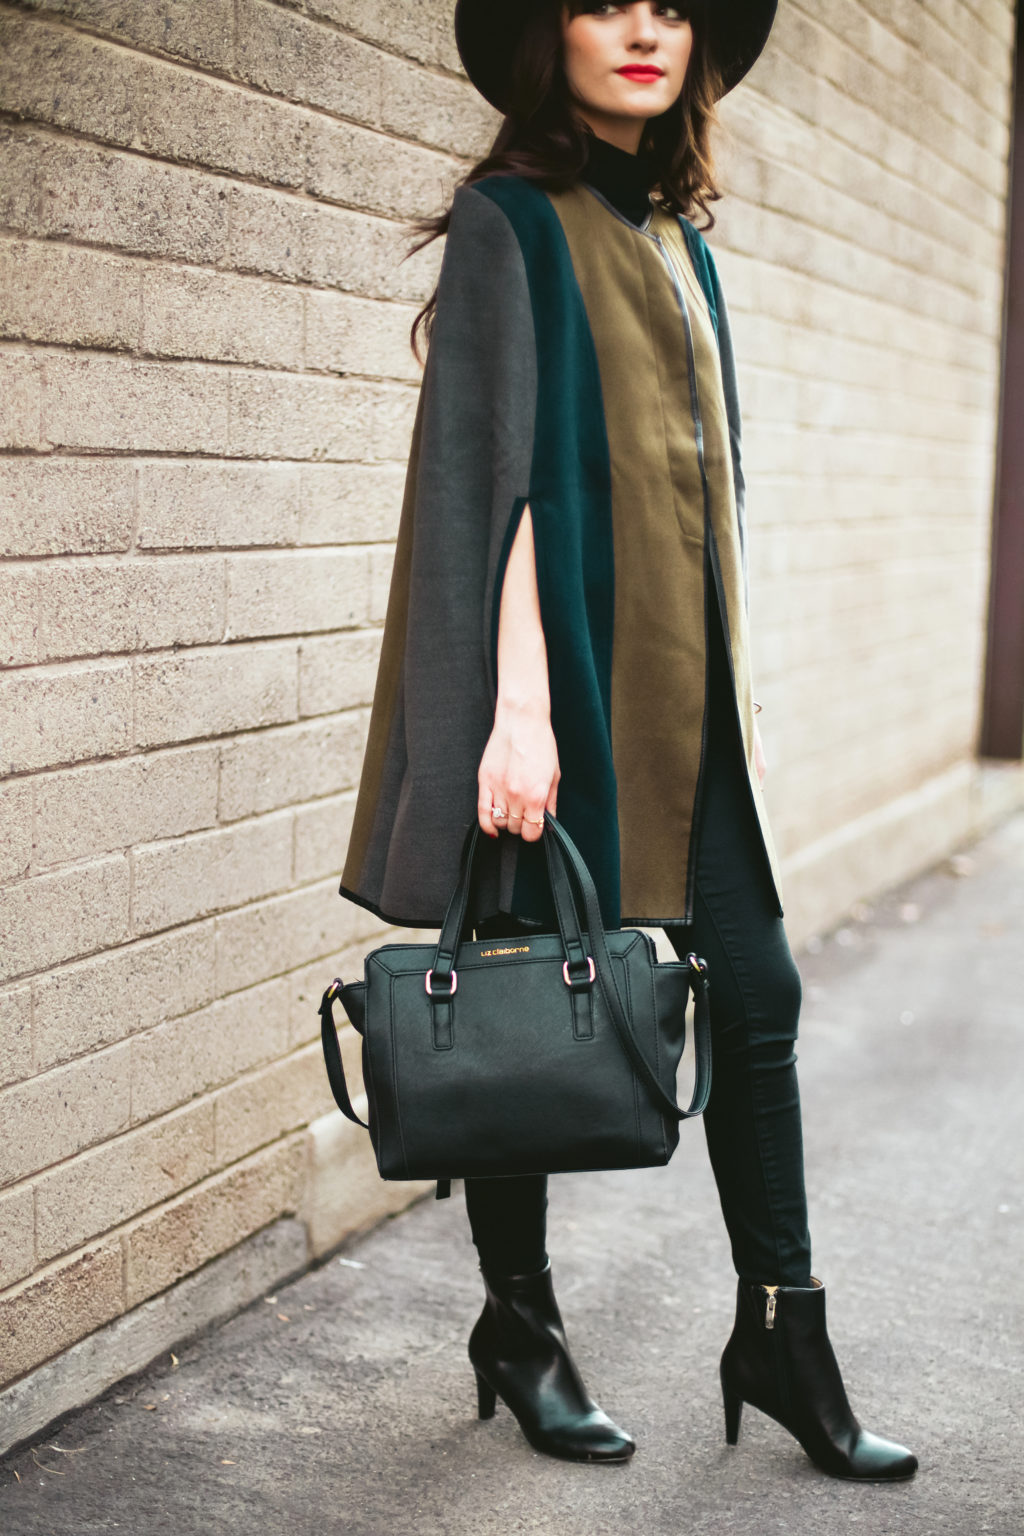 New Darlings - Day to Night Fall Inspired Looks with JCPenney - Black Turtleneck Colorblock Cape